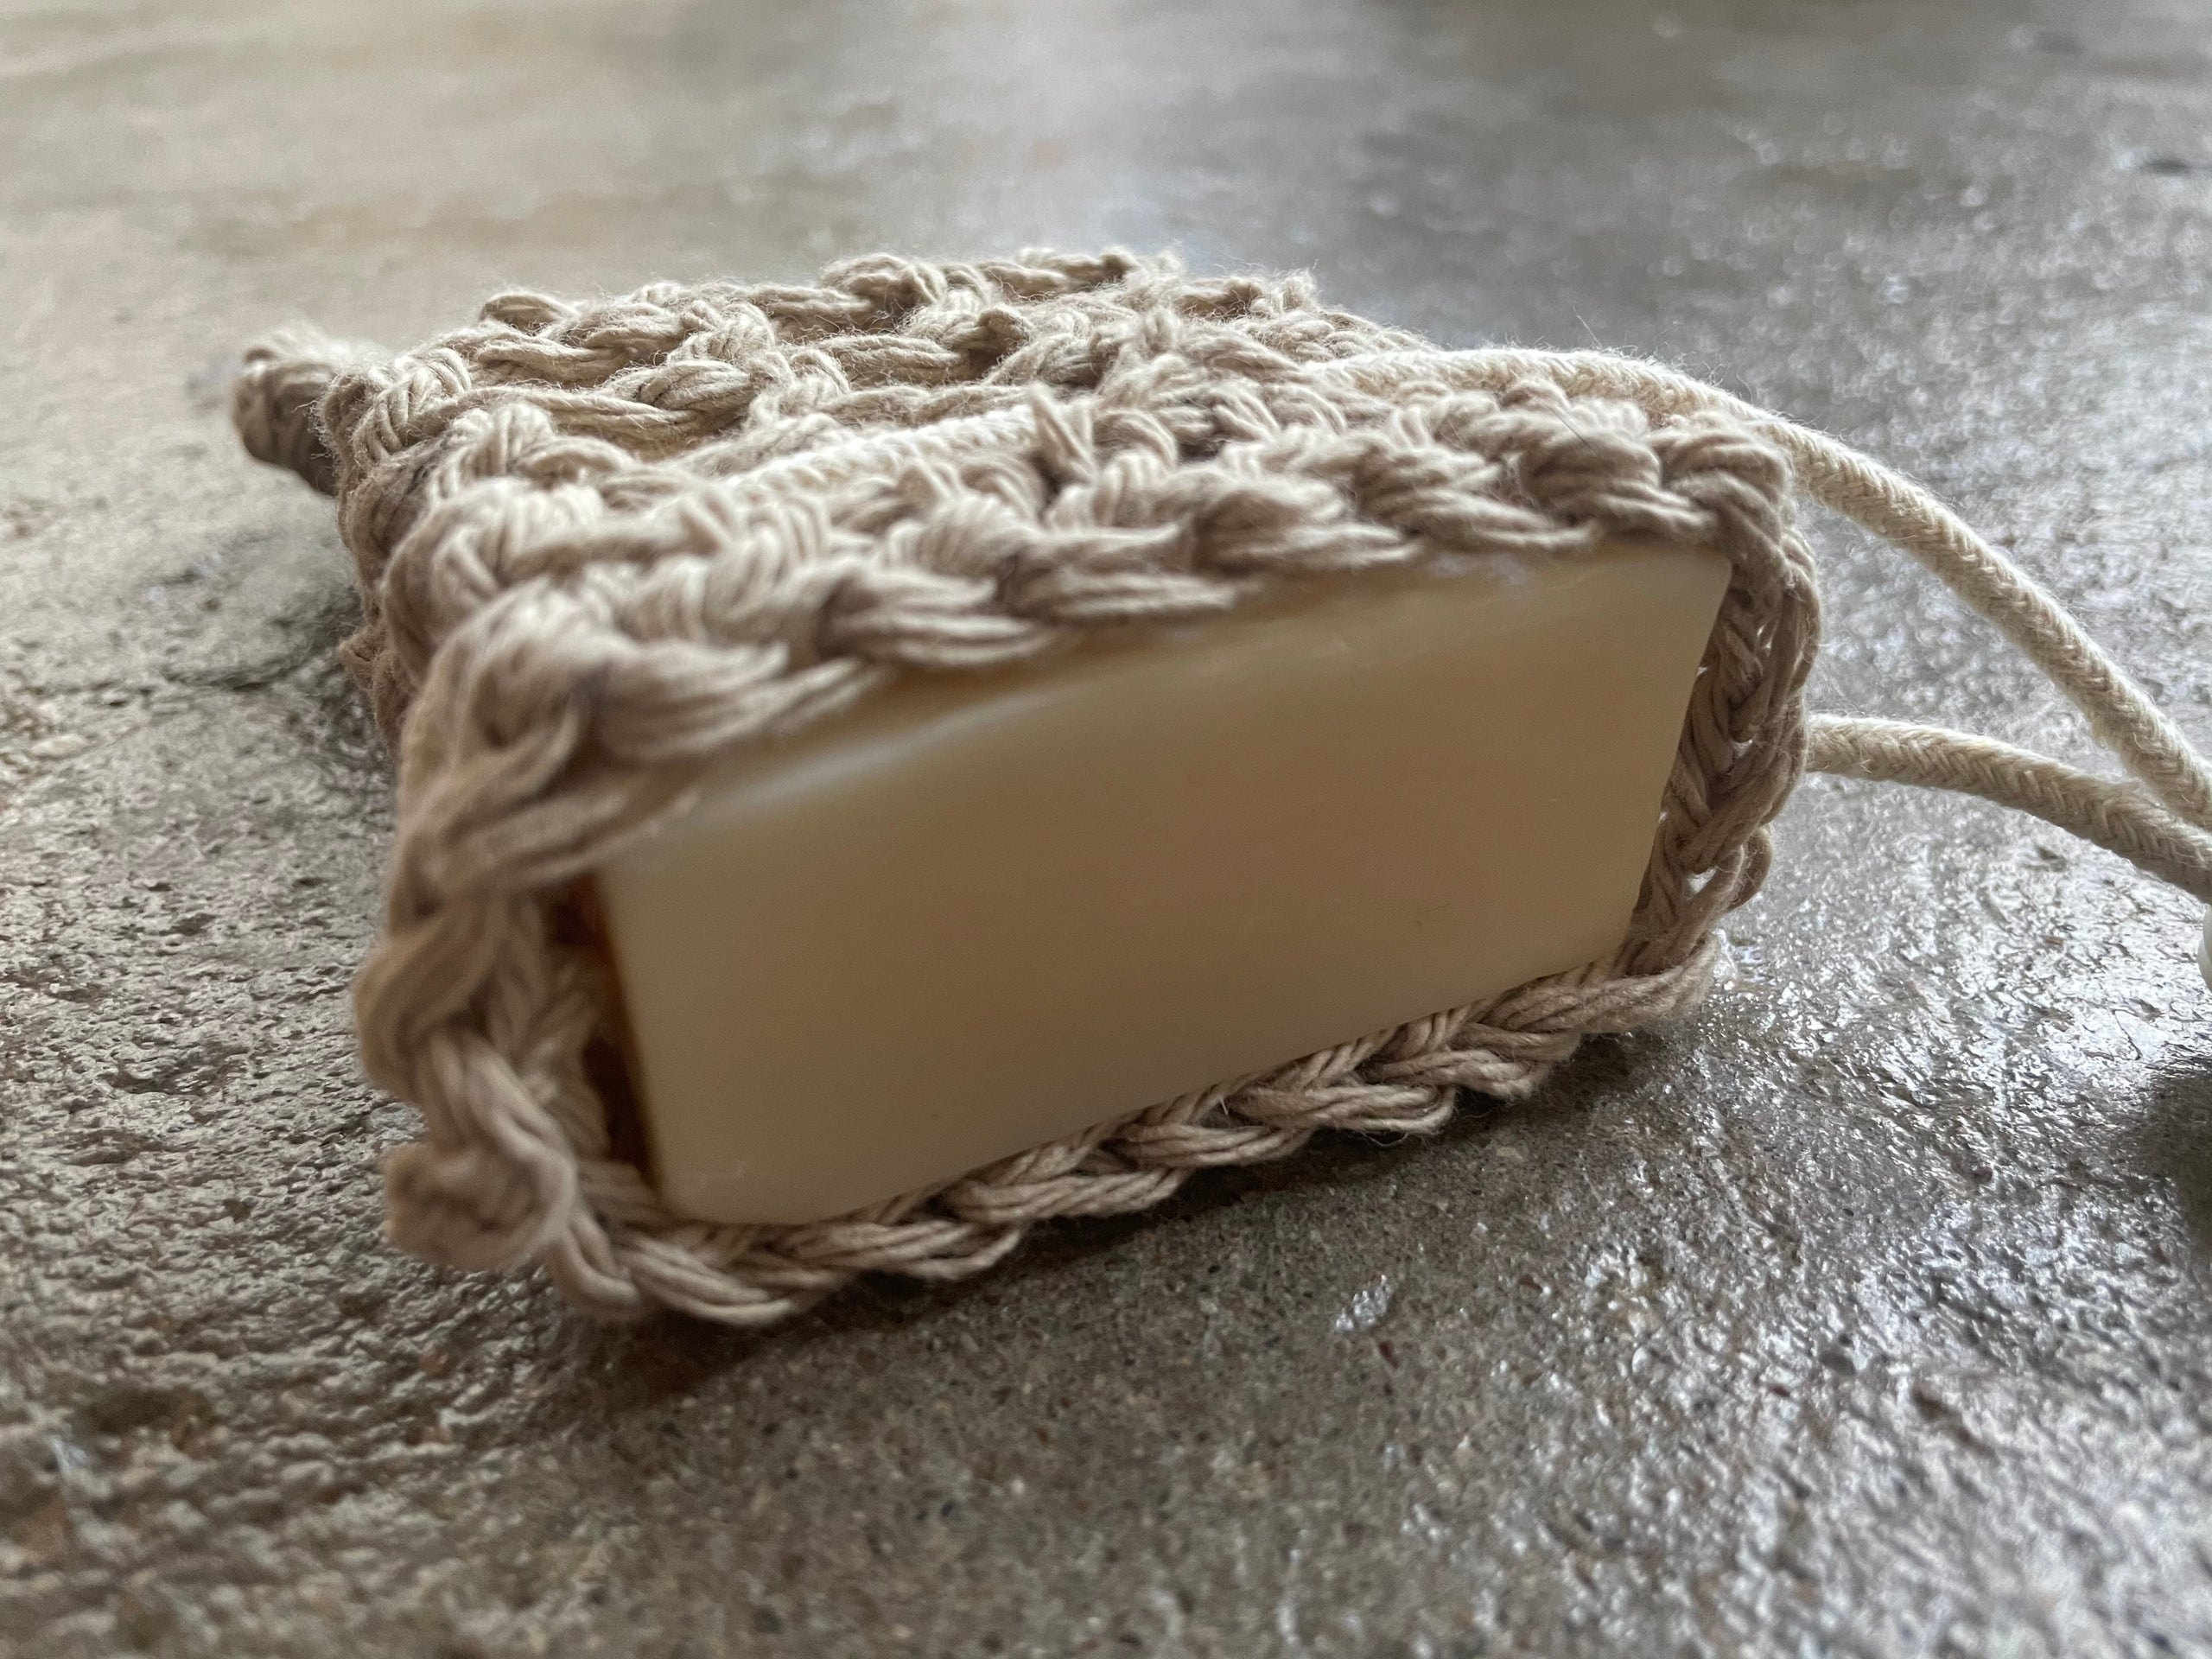 Hand woven soap saver that goes around the soap bar and acts as a gentle exfoliator.